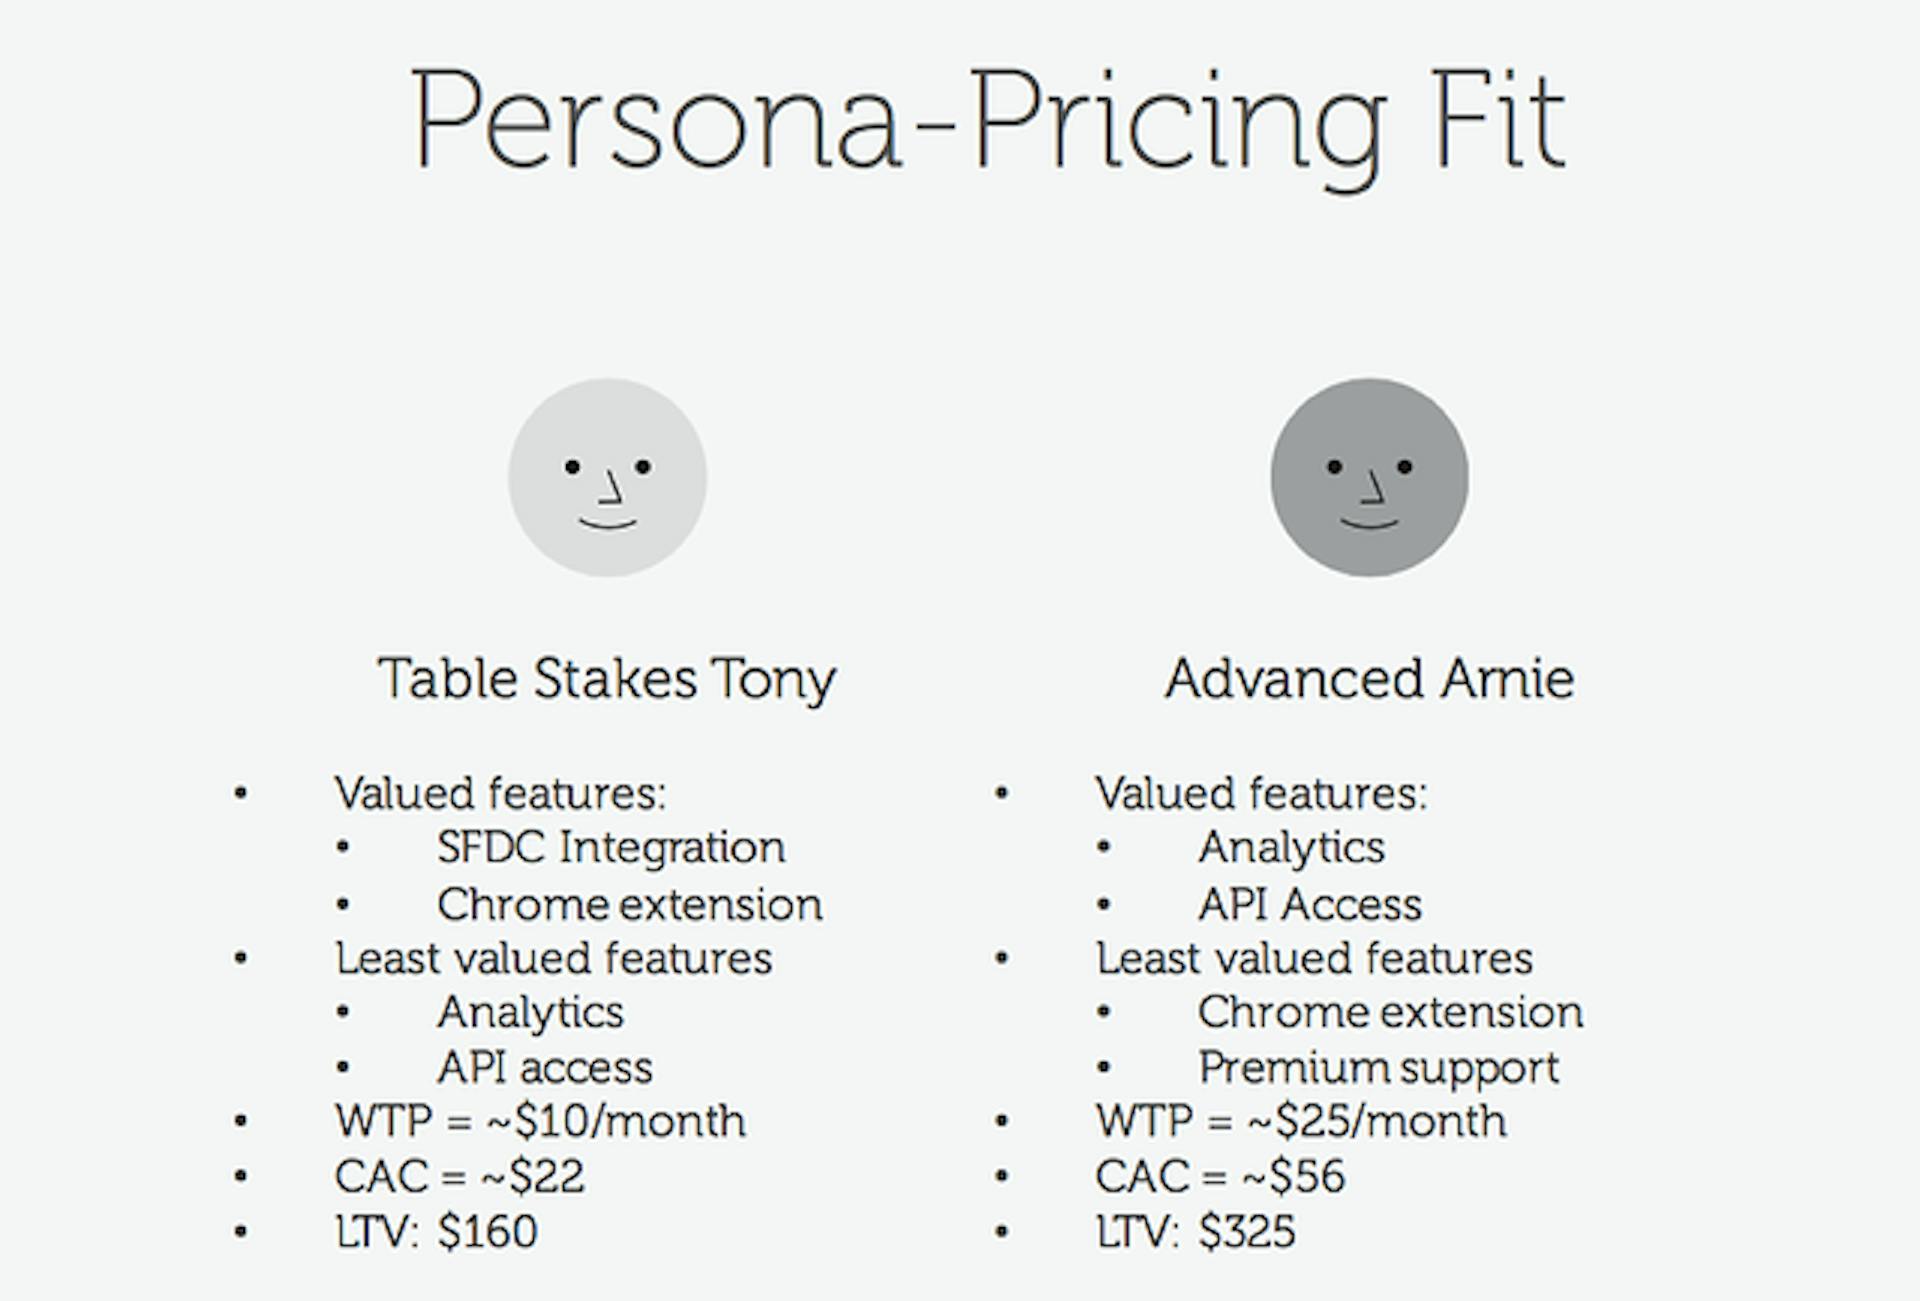 Persona-pricing fit example: Table stakes Tony values different features to advanced Annie, and has a lower willingness to pay